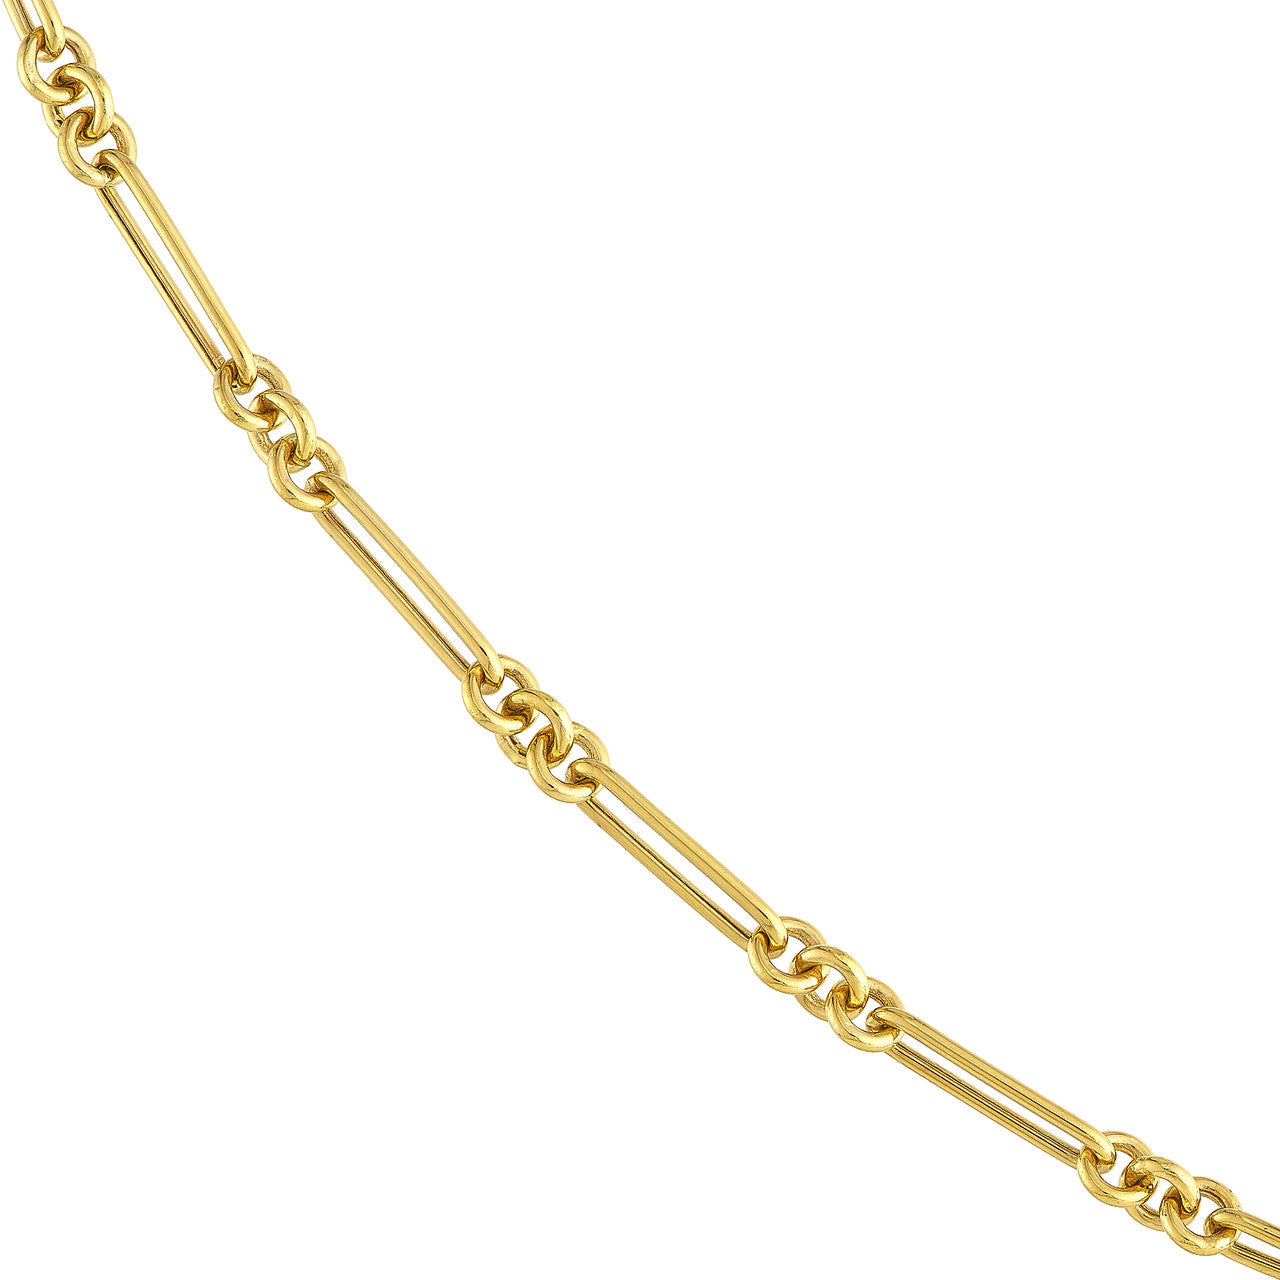 14k Yellow Gold Fancy Rounded Paper Clip Link Bracelet Anklet Choker Necklace Pendant Chain